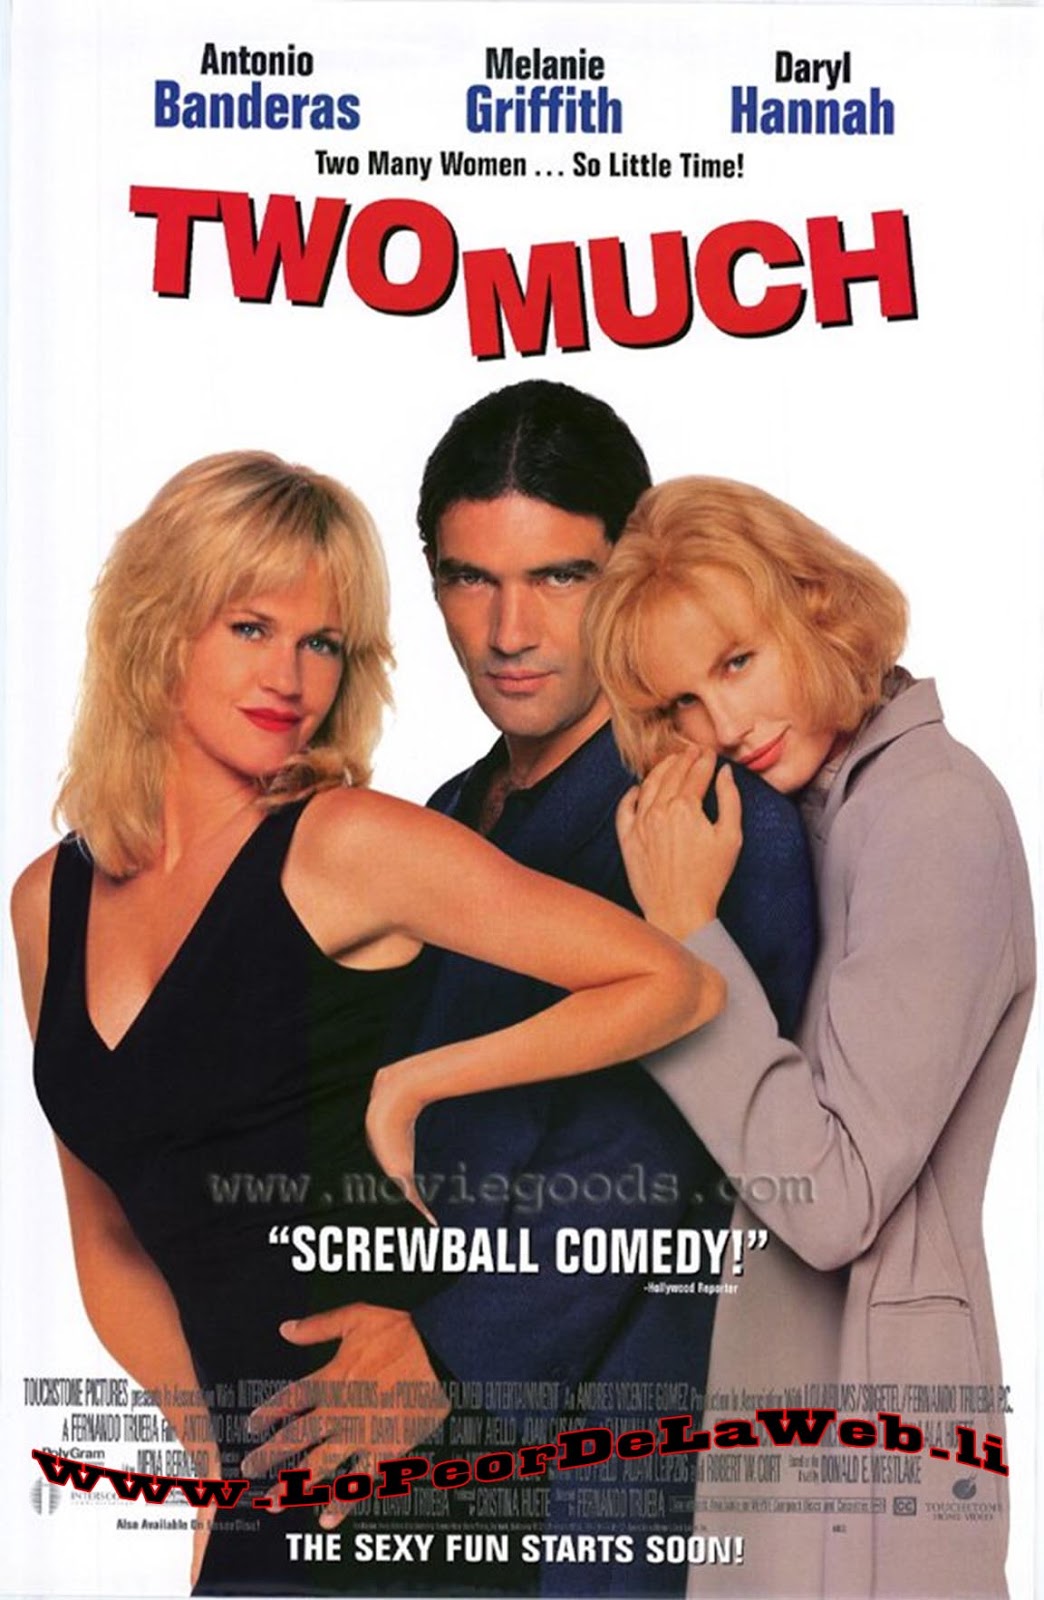 Loco de Amor (Two Much - 1996 - A. Banderas / M. Griffith)